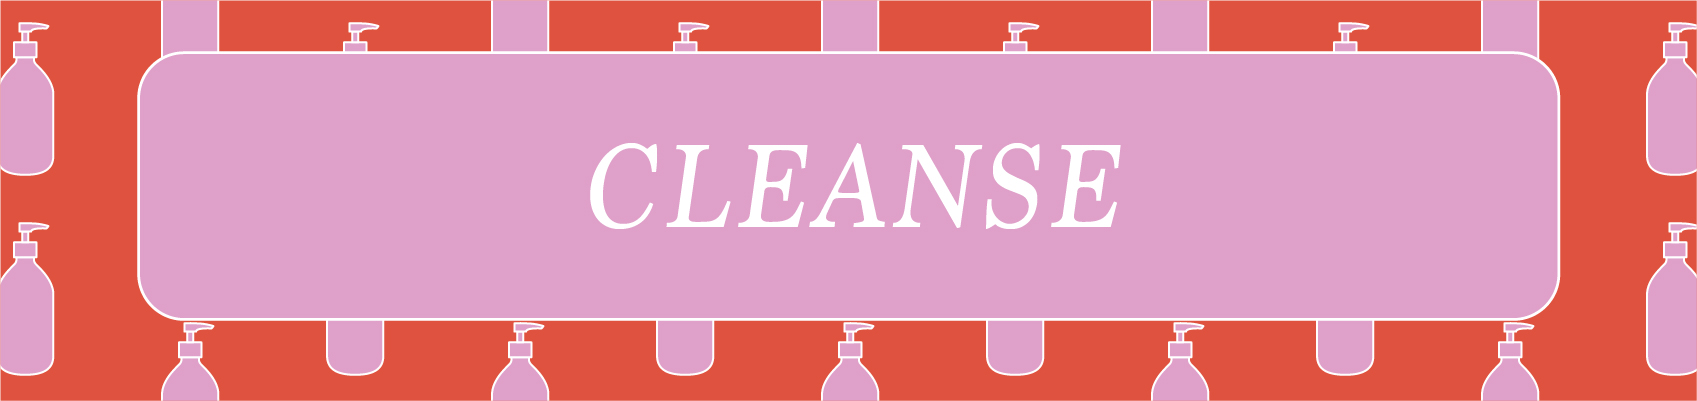 cleanse with illustrations of cleansers